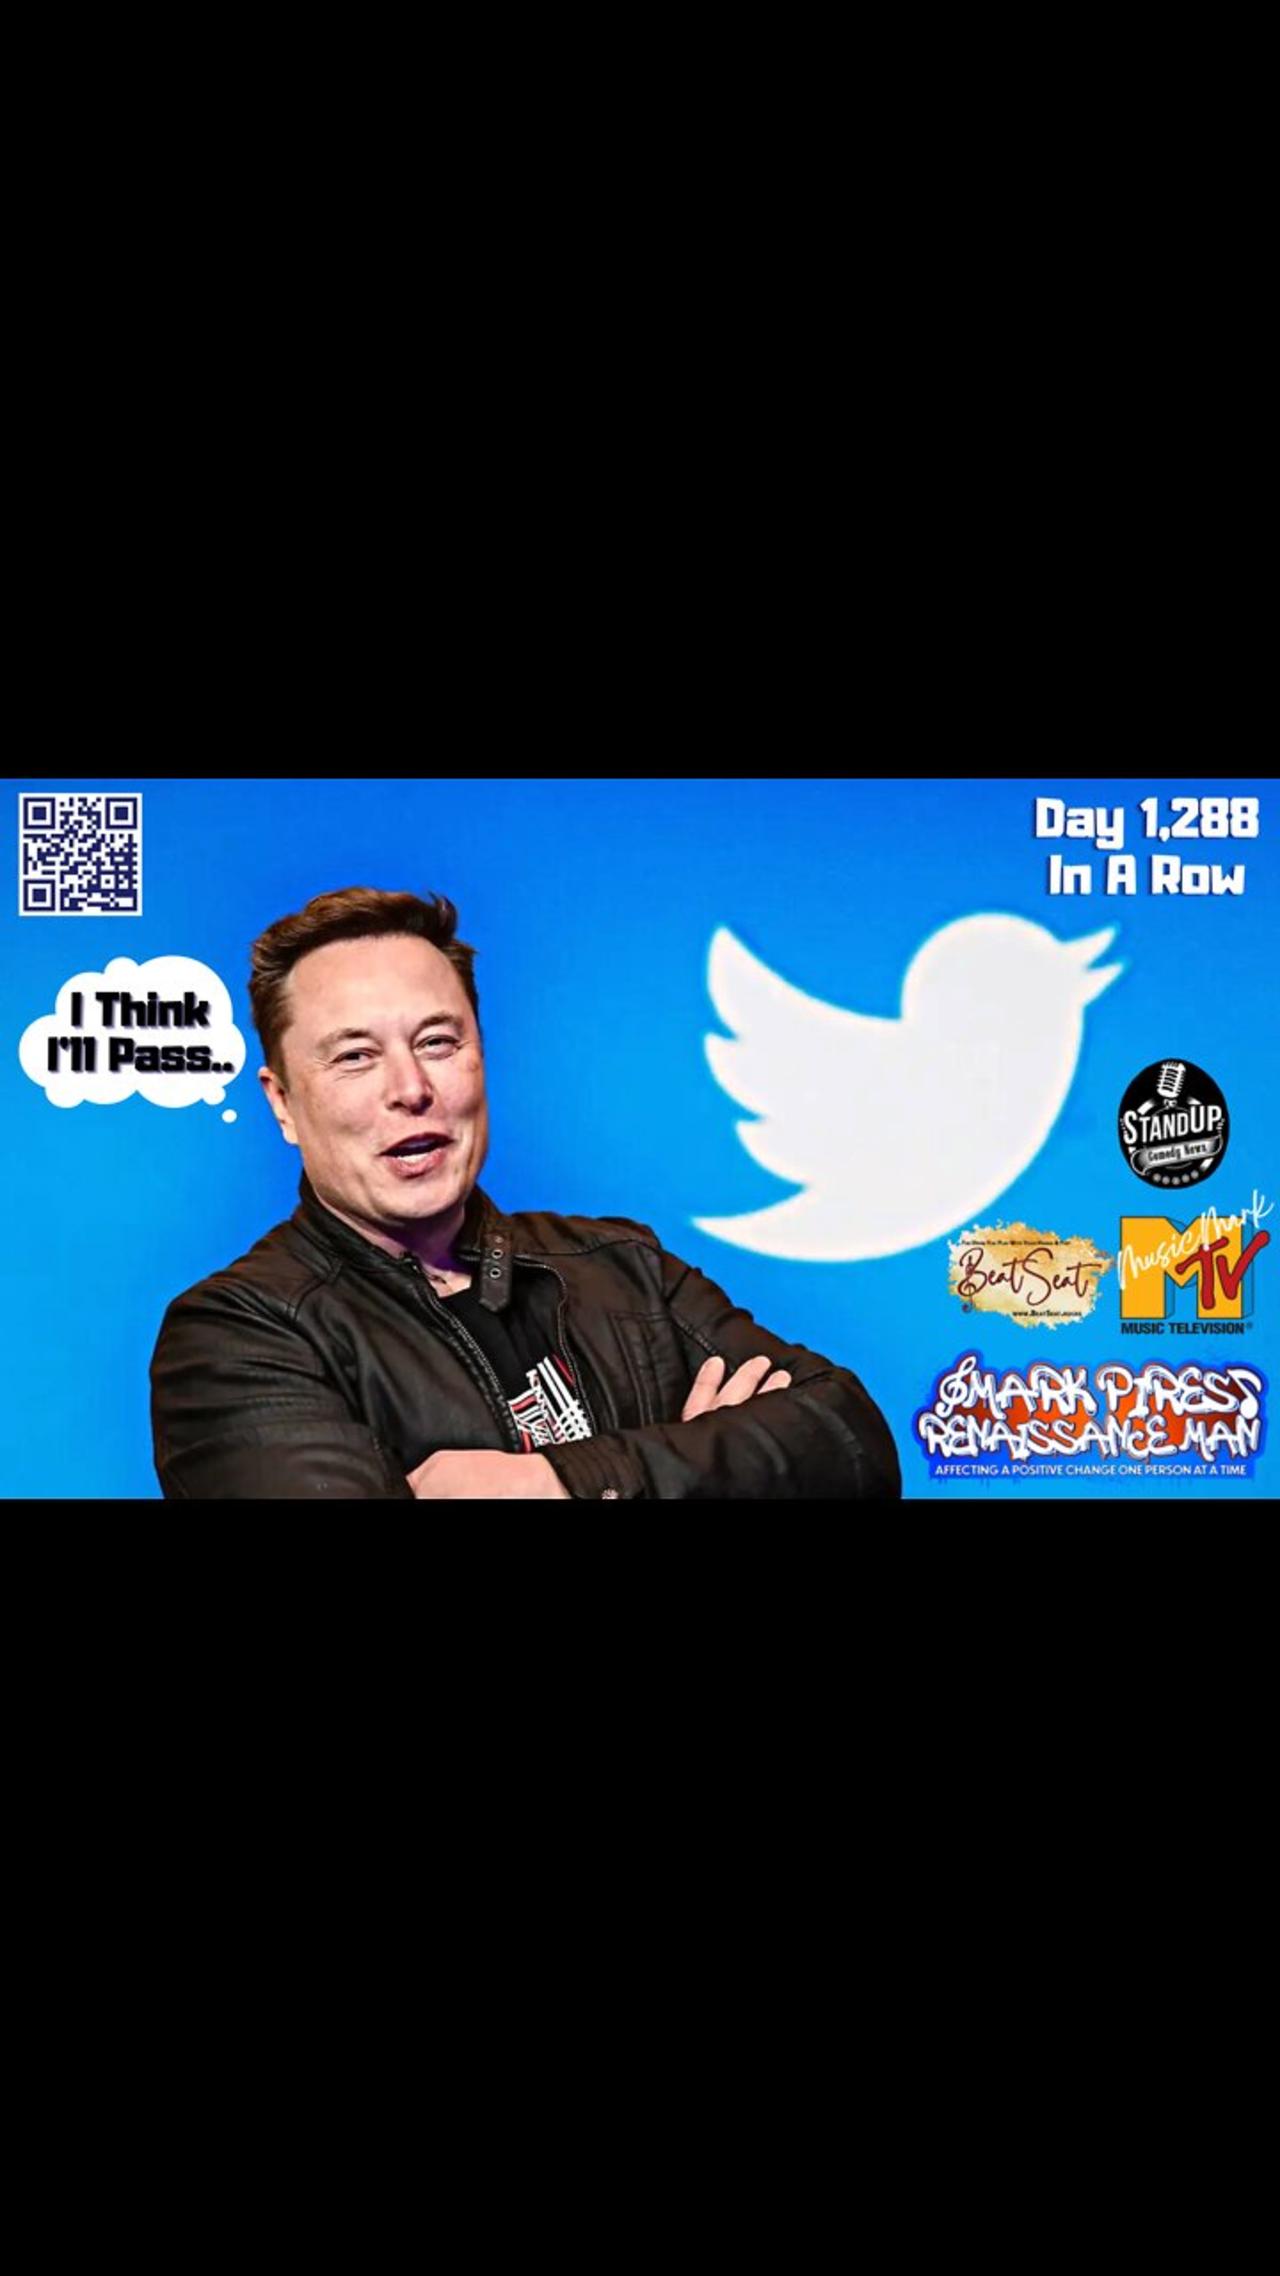 Twitter has vowed to sue Elon Musk. Here's what could happen next..